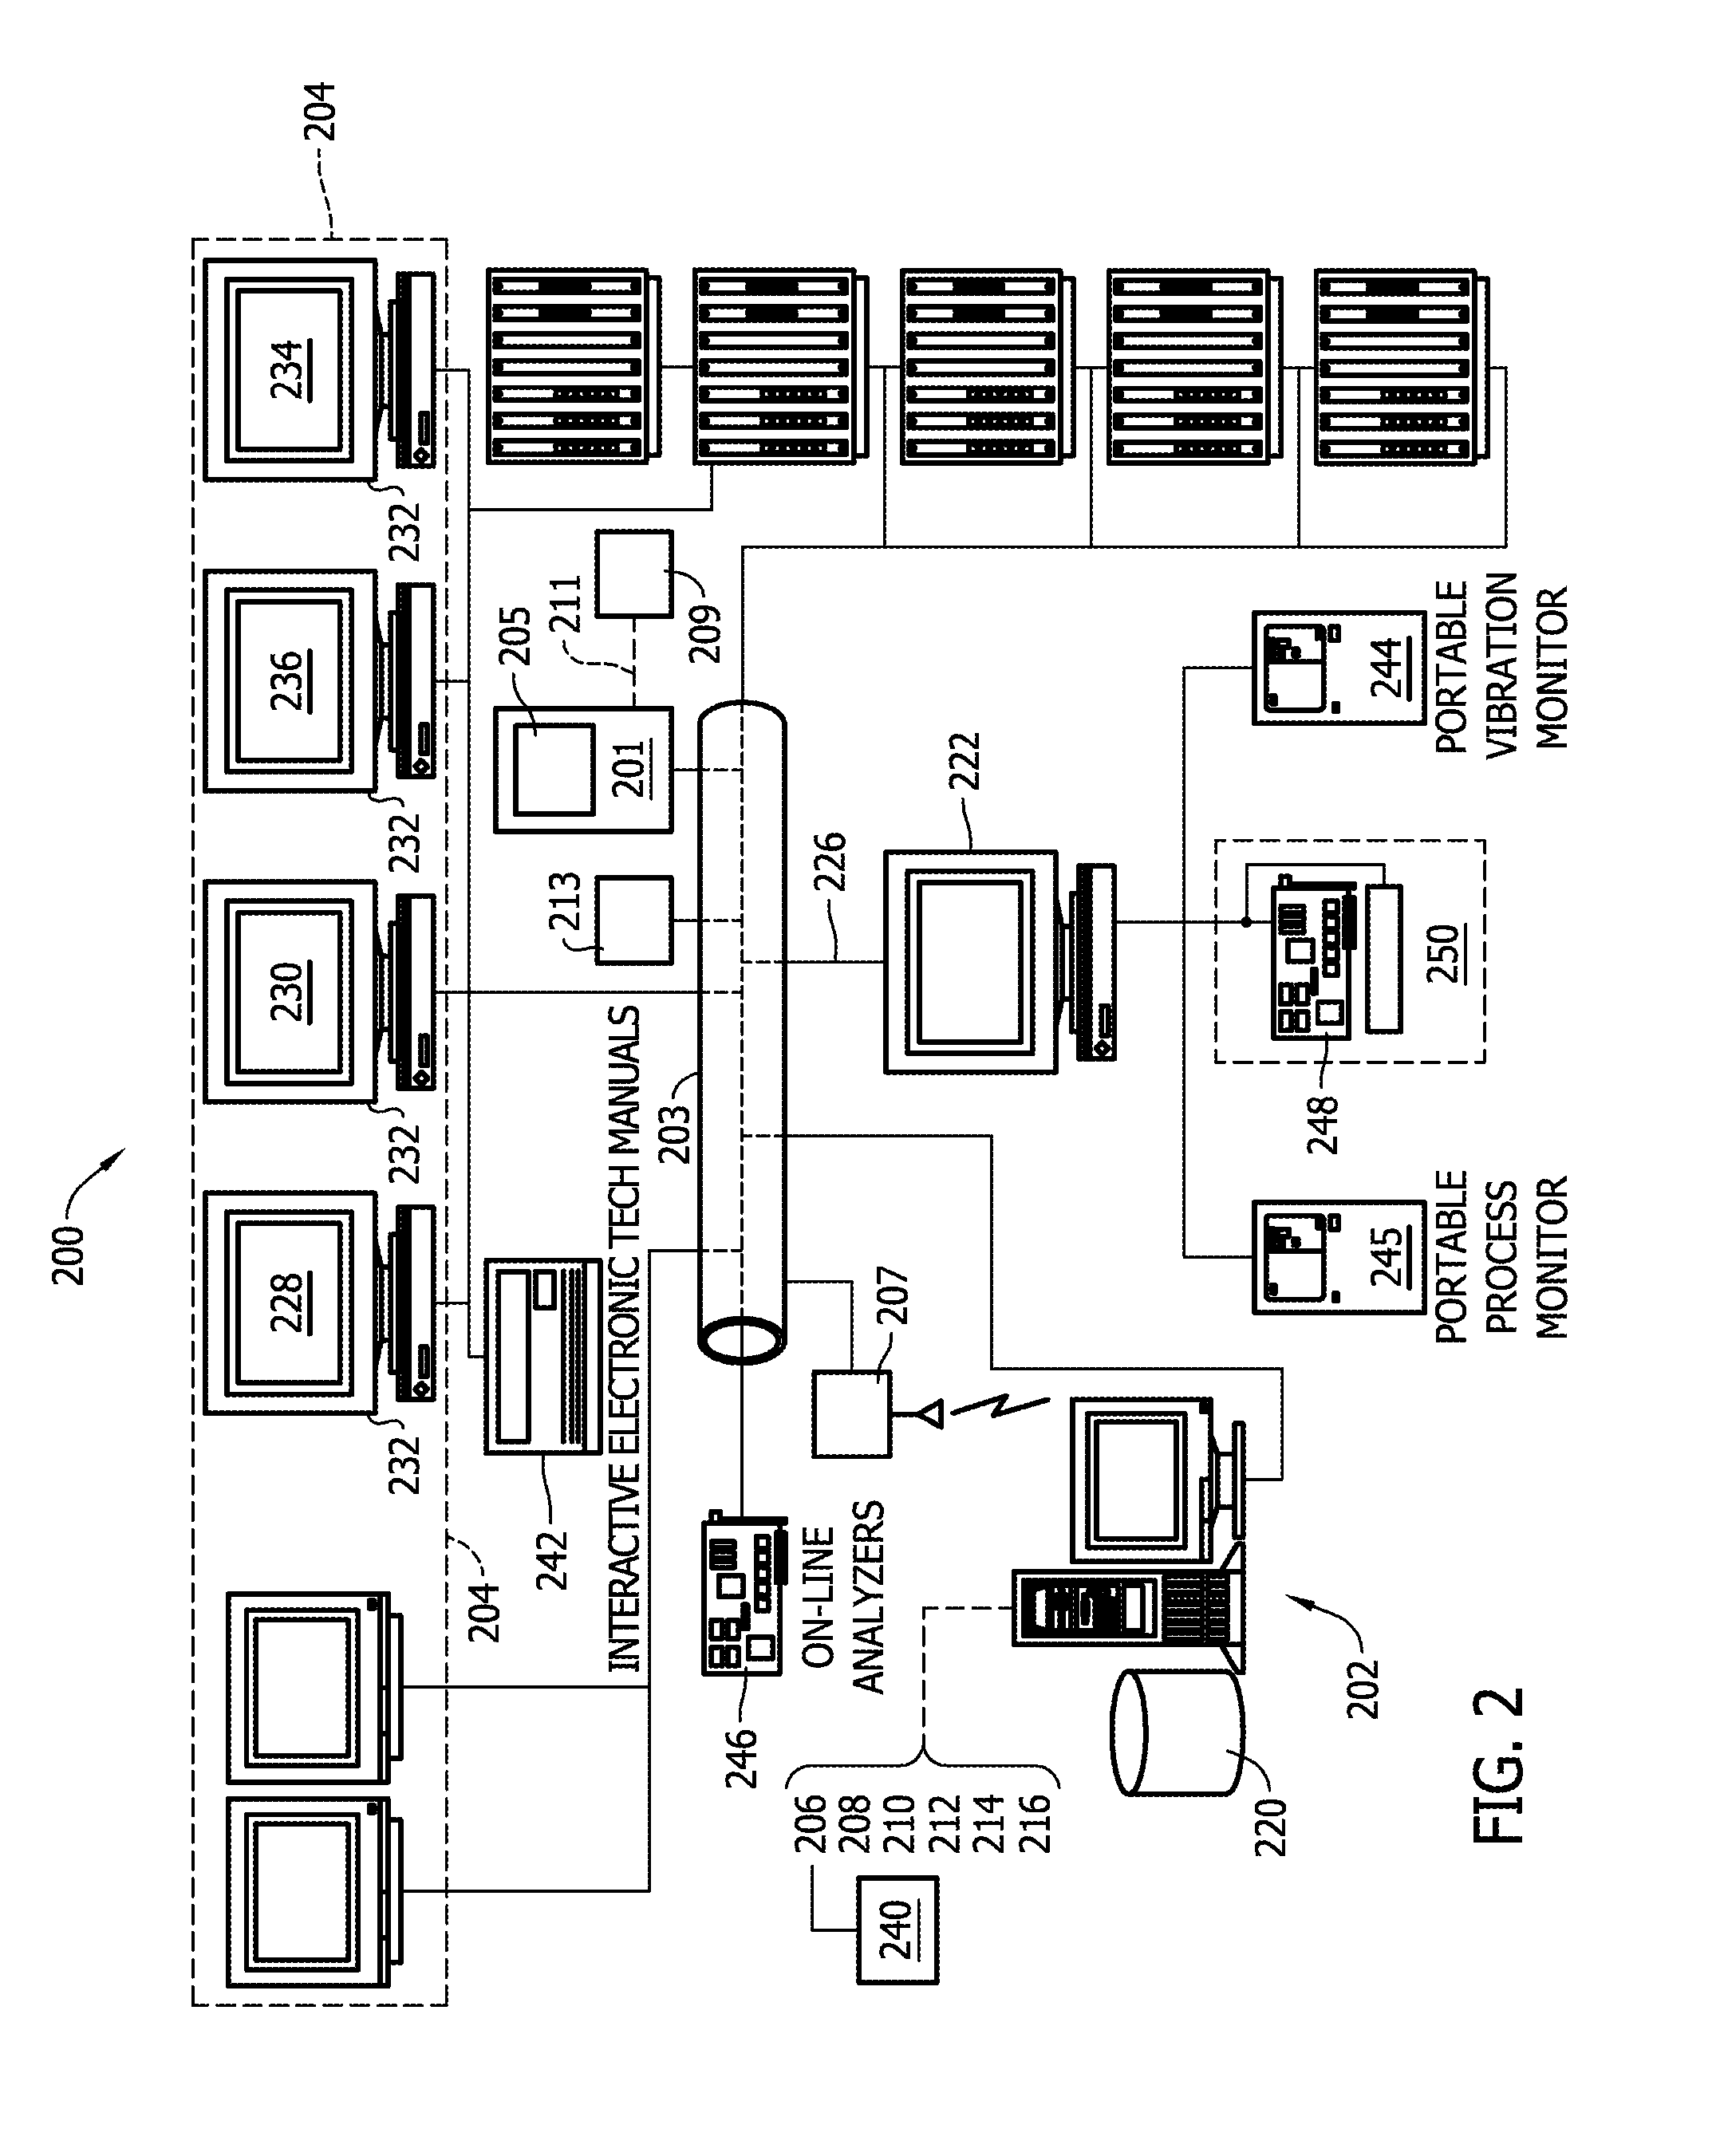 Method and system for realtime performance recovery advisory for centrifugal compressors